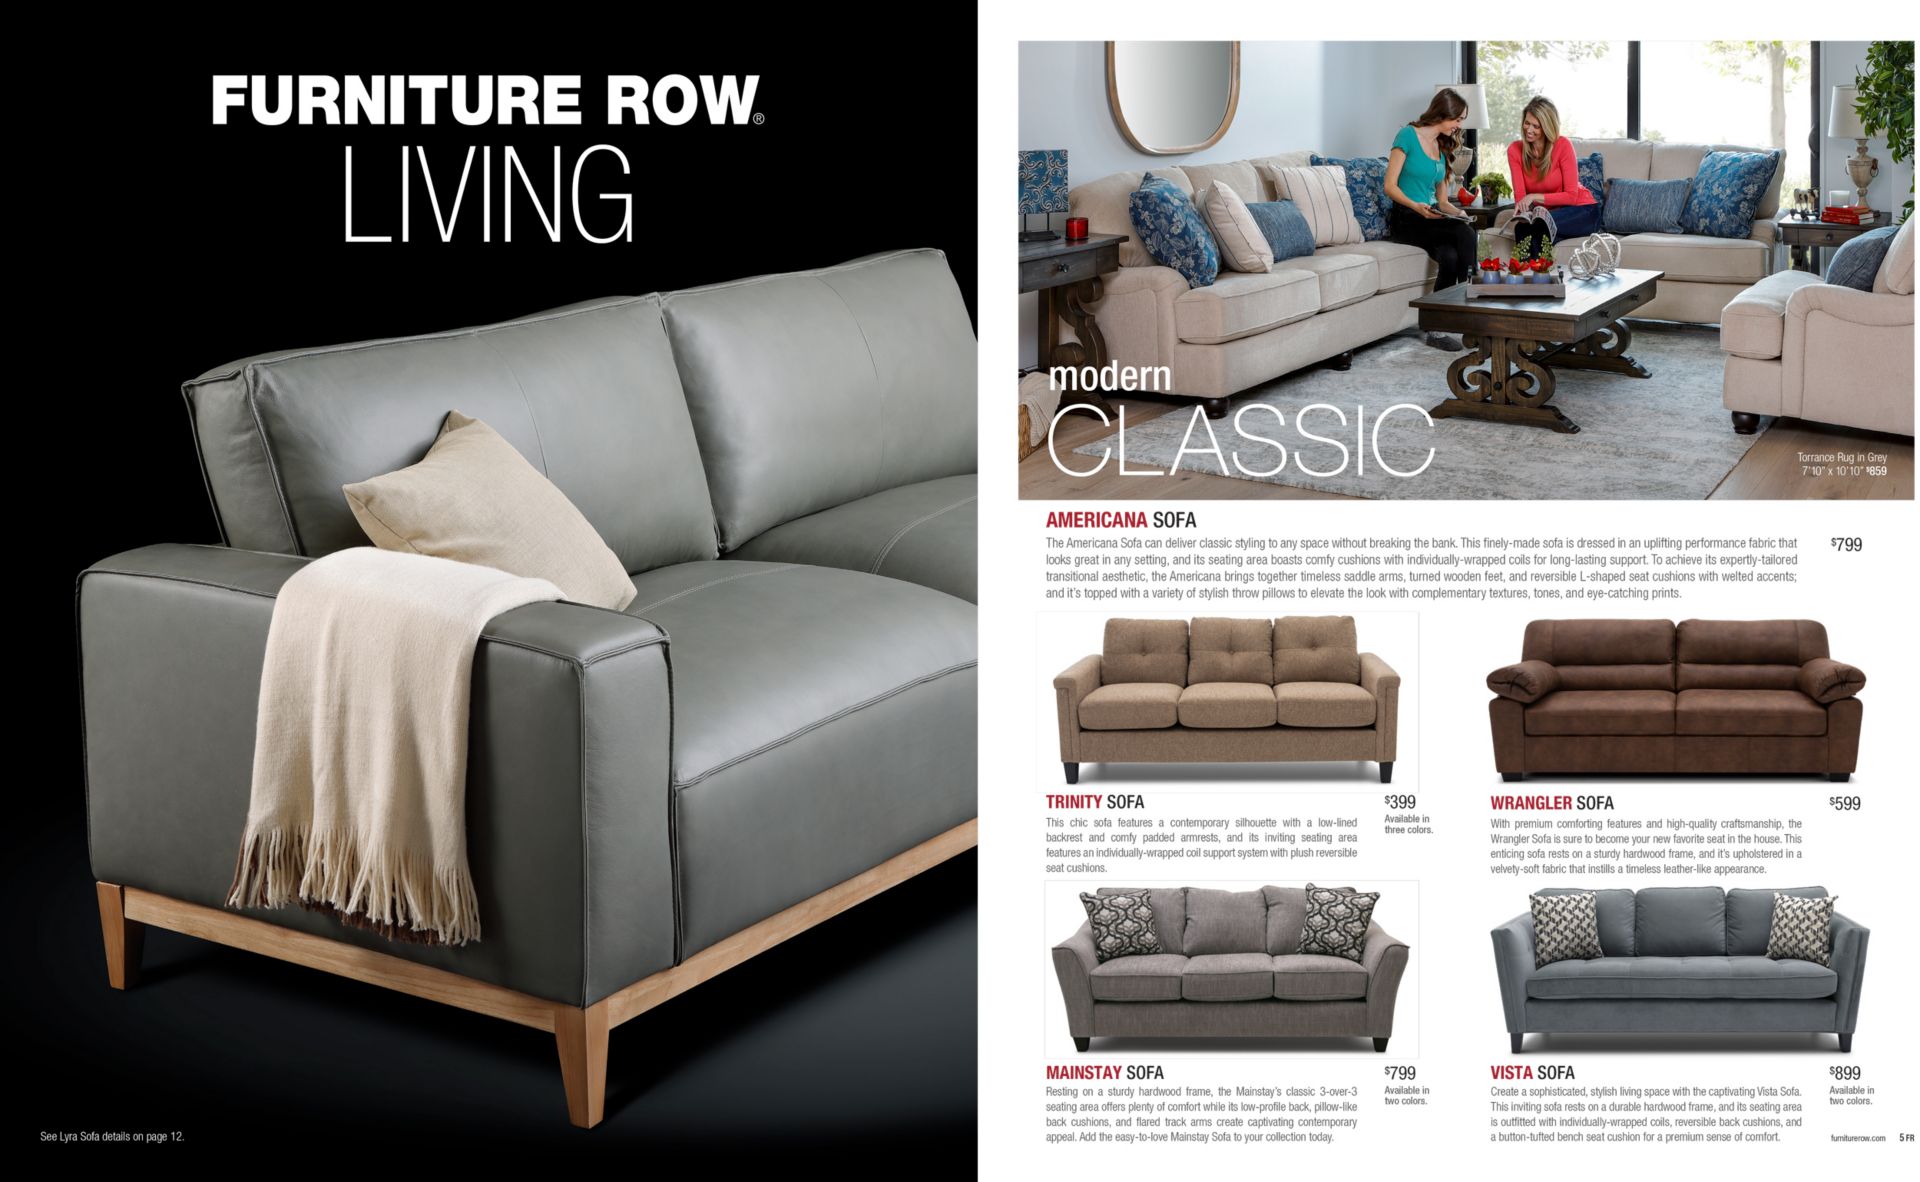 Furniture Row Living Catalog Preview. Text: Modern Classic. AMERICANA SOFA The Americana Sofa can deliver classic styling to any space without breaking the bank. This finely-made sofa is dressed in an uplifting performance fabric that looks great in any setting, and its seating area boasts comfy cushions with individually-wrapped coils for long-lasting support. To achieve its expertly-tailored transitional aesthetic, the Americana brings together timeless saddle arms, turned wooden feet, and reversible L-shaped seat cushions with welted accents; and it’s topped with a variety of stylish throw pillows to elevate the look with complementary textures, tones, and eye-catching prints. TRINITY SOFA This chic sofa features a contemporary silhouette with a low-lined backrest and comfy padded armrests, and its inviting seating area features an individually-wrapped coil support system with plush reversible seat cushions. WRANGLER SOFA With premium comforting features and high-quality craftsmanship, the Wrangler Sofa is sure to become your new favorite seat in the house. This enticing sofa rests on a sturdy hardwood frame, and it’s upholstered in a velvety-soft fabric that instills a timeless leather-like appearance. MAINSTAY SOFA Resting on a sturdy hardwood frame, the Mainstay’s classic 3-over-3 seating area offers plenty of comfort while its low-profile back, pillow-like back cushions, and flared track arms create captivating contemporary appeal. Add the easy-to-love Mainstay Sofa to your collection today. VISTA SOFA Create a sophisticated, stylish living space with the captivating Vista Sofa. This inviting sofa rests on a durable hardwood frame, and its seating area is outfitted with individually-wrapped coils, reversible back cushions, and a button-tufted bench seat cushion for a premium sense of comfort.